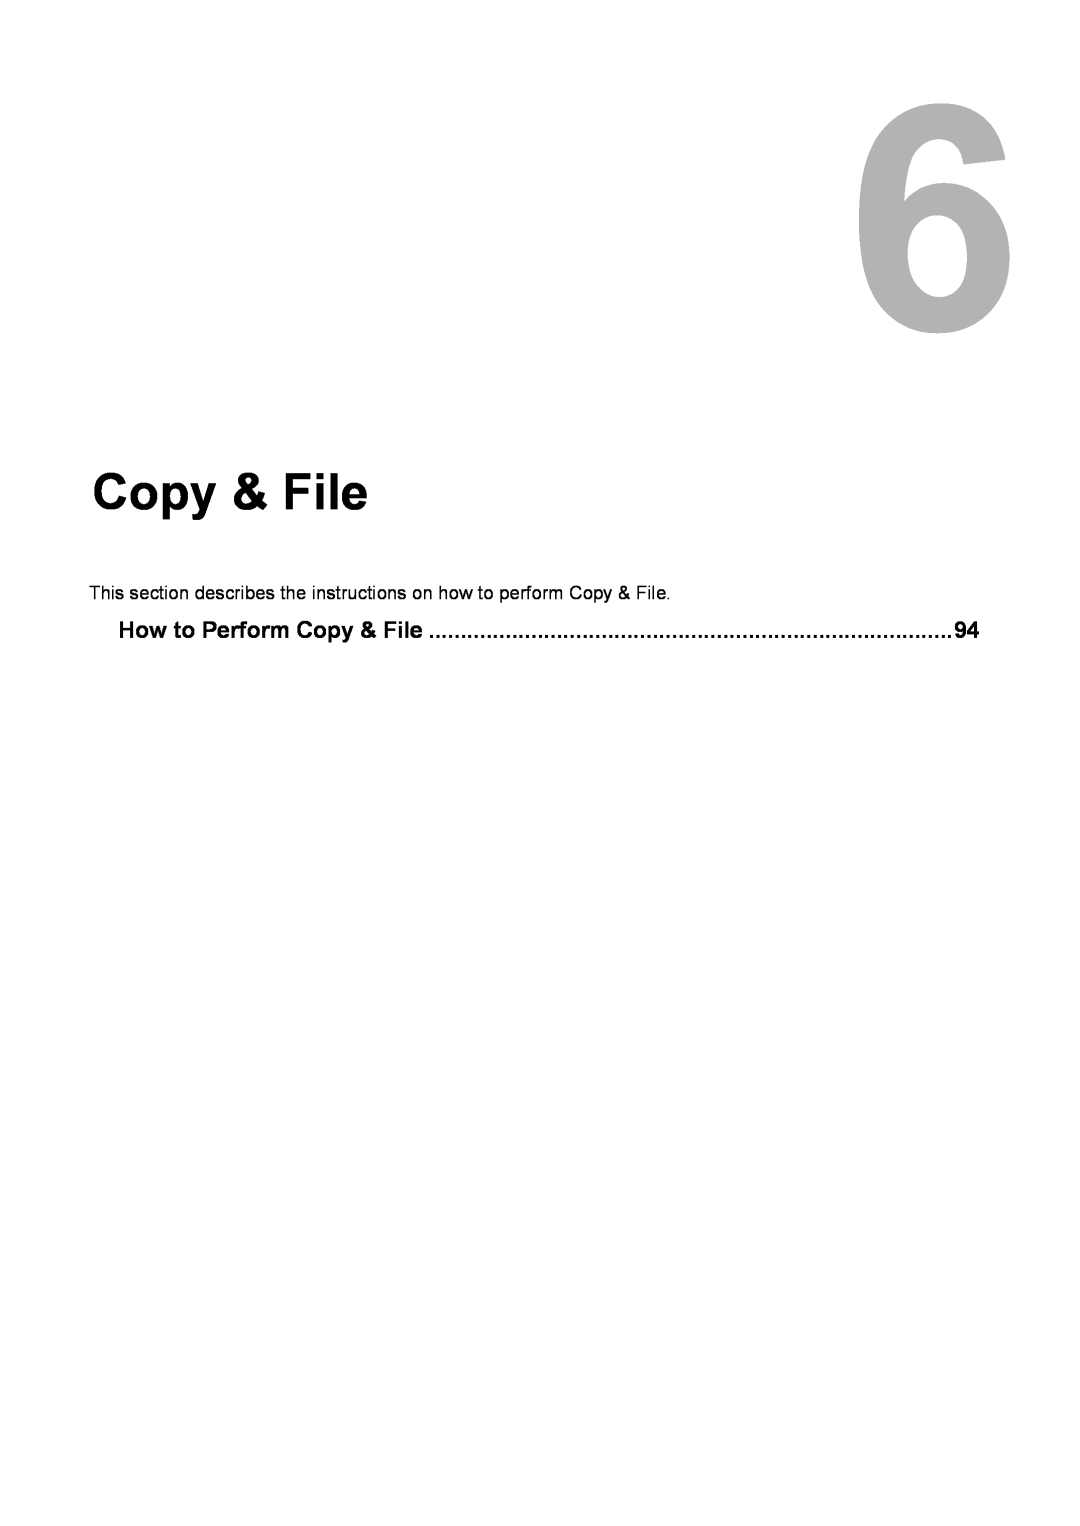 Toshiba 3510C, 3500C How to Perform Copy & File, This section describes the instructions on how to perform Copy & File 